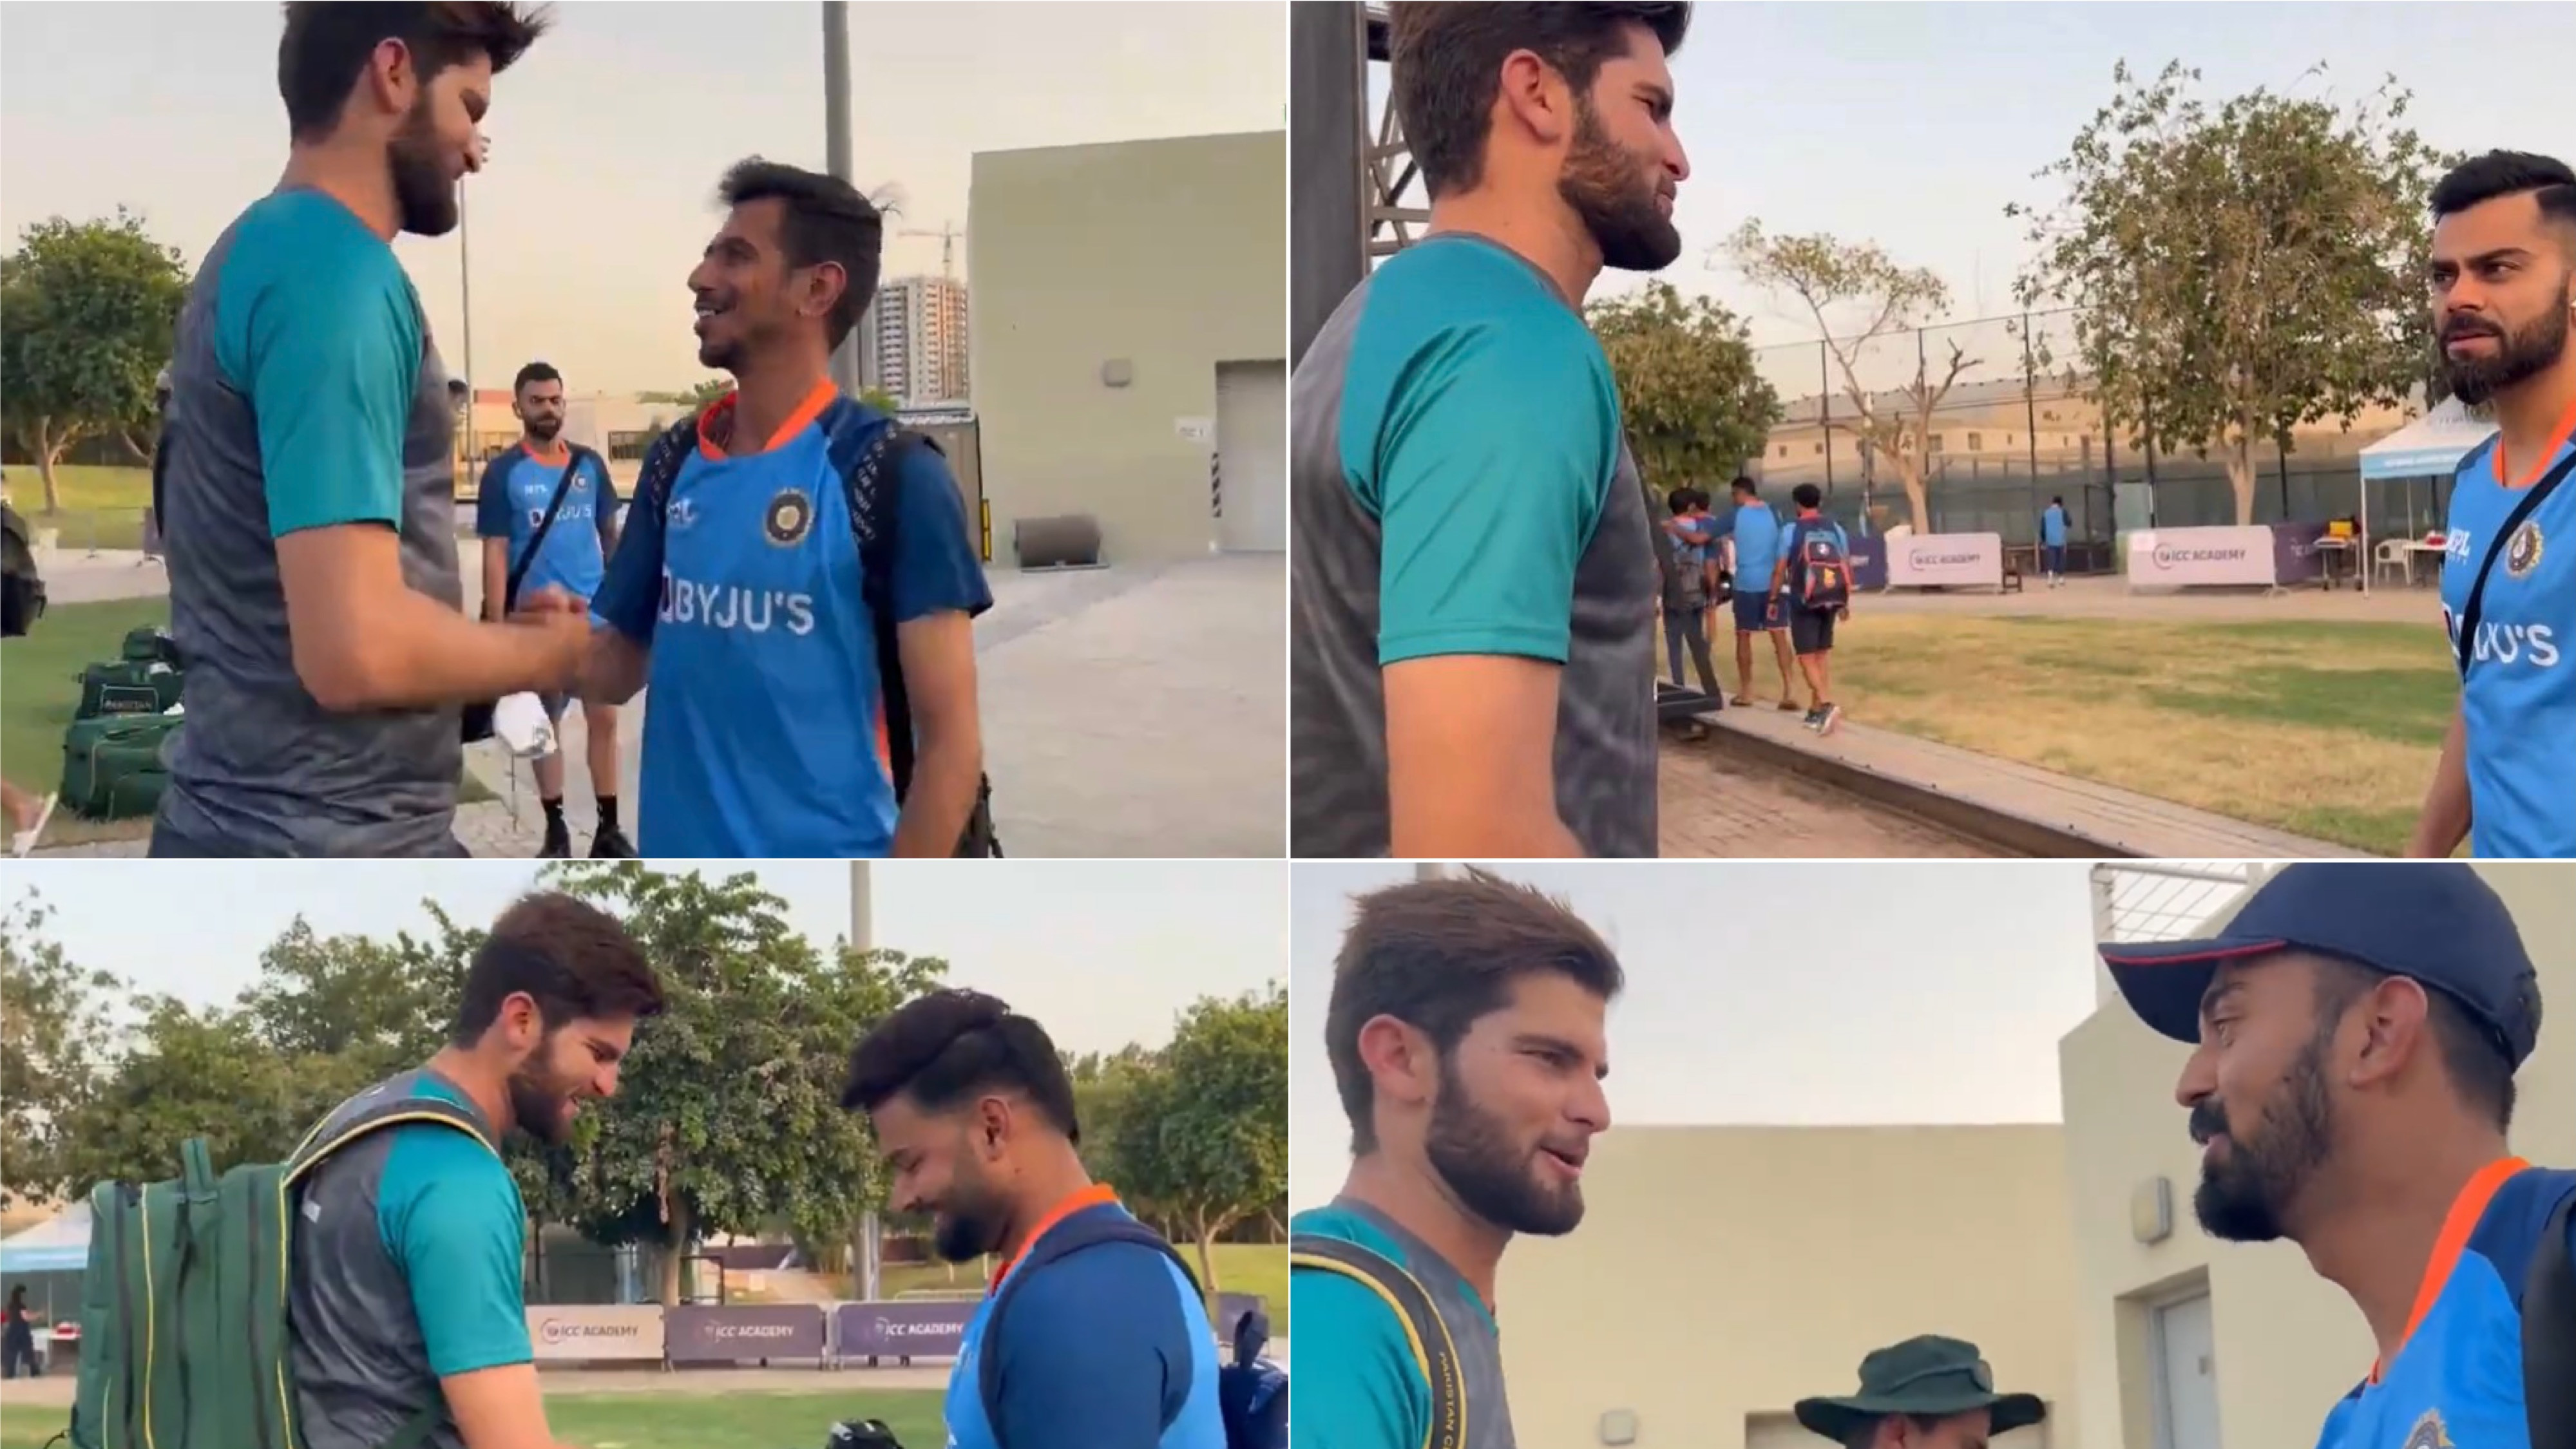 Asia Cup 2022: WATCH - Pakistan's Shaheen Afridi catches up with India's Chahal, Kohli, Pant and KL Rahul